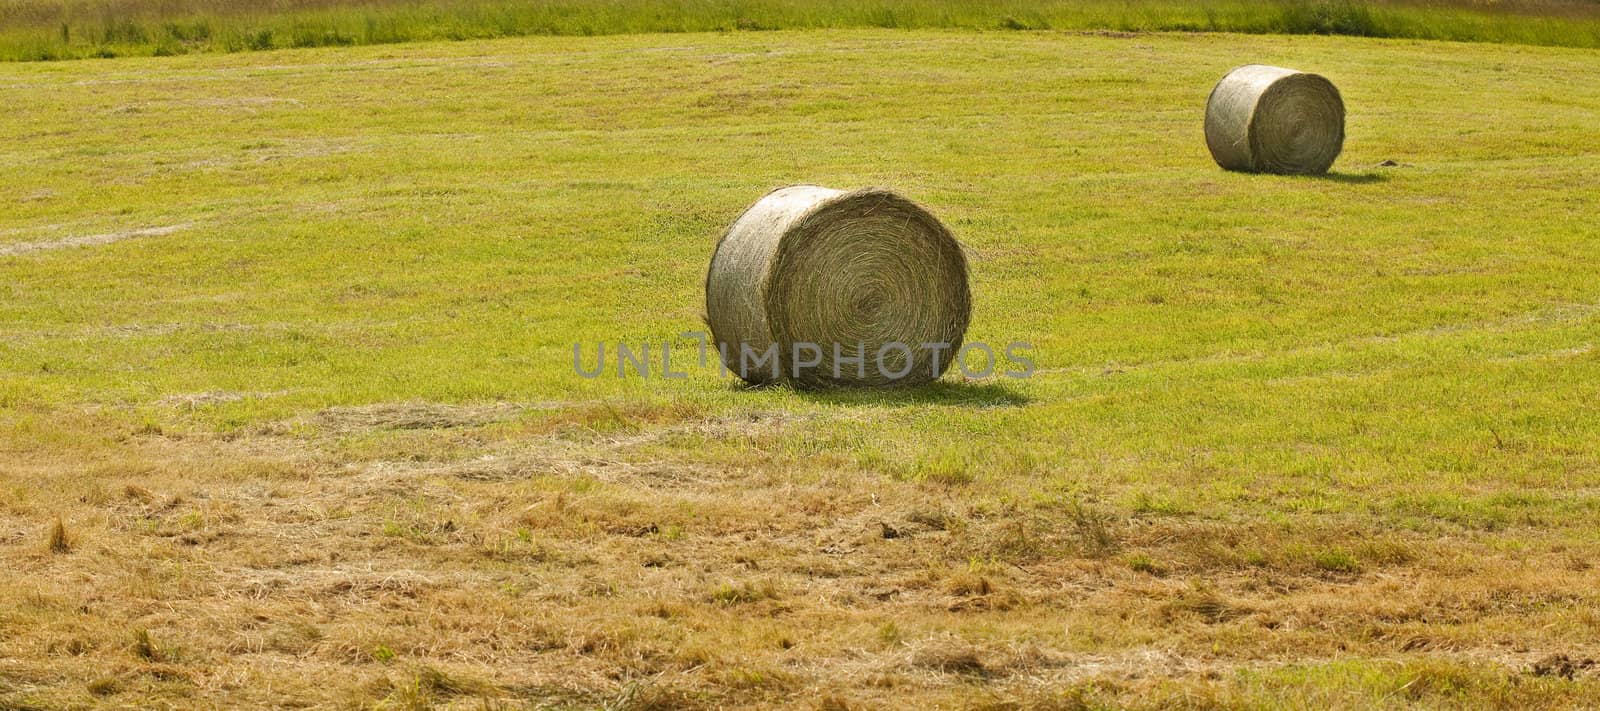 Round haystacks in a field by jannyjus